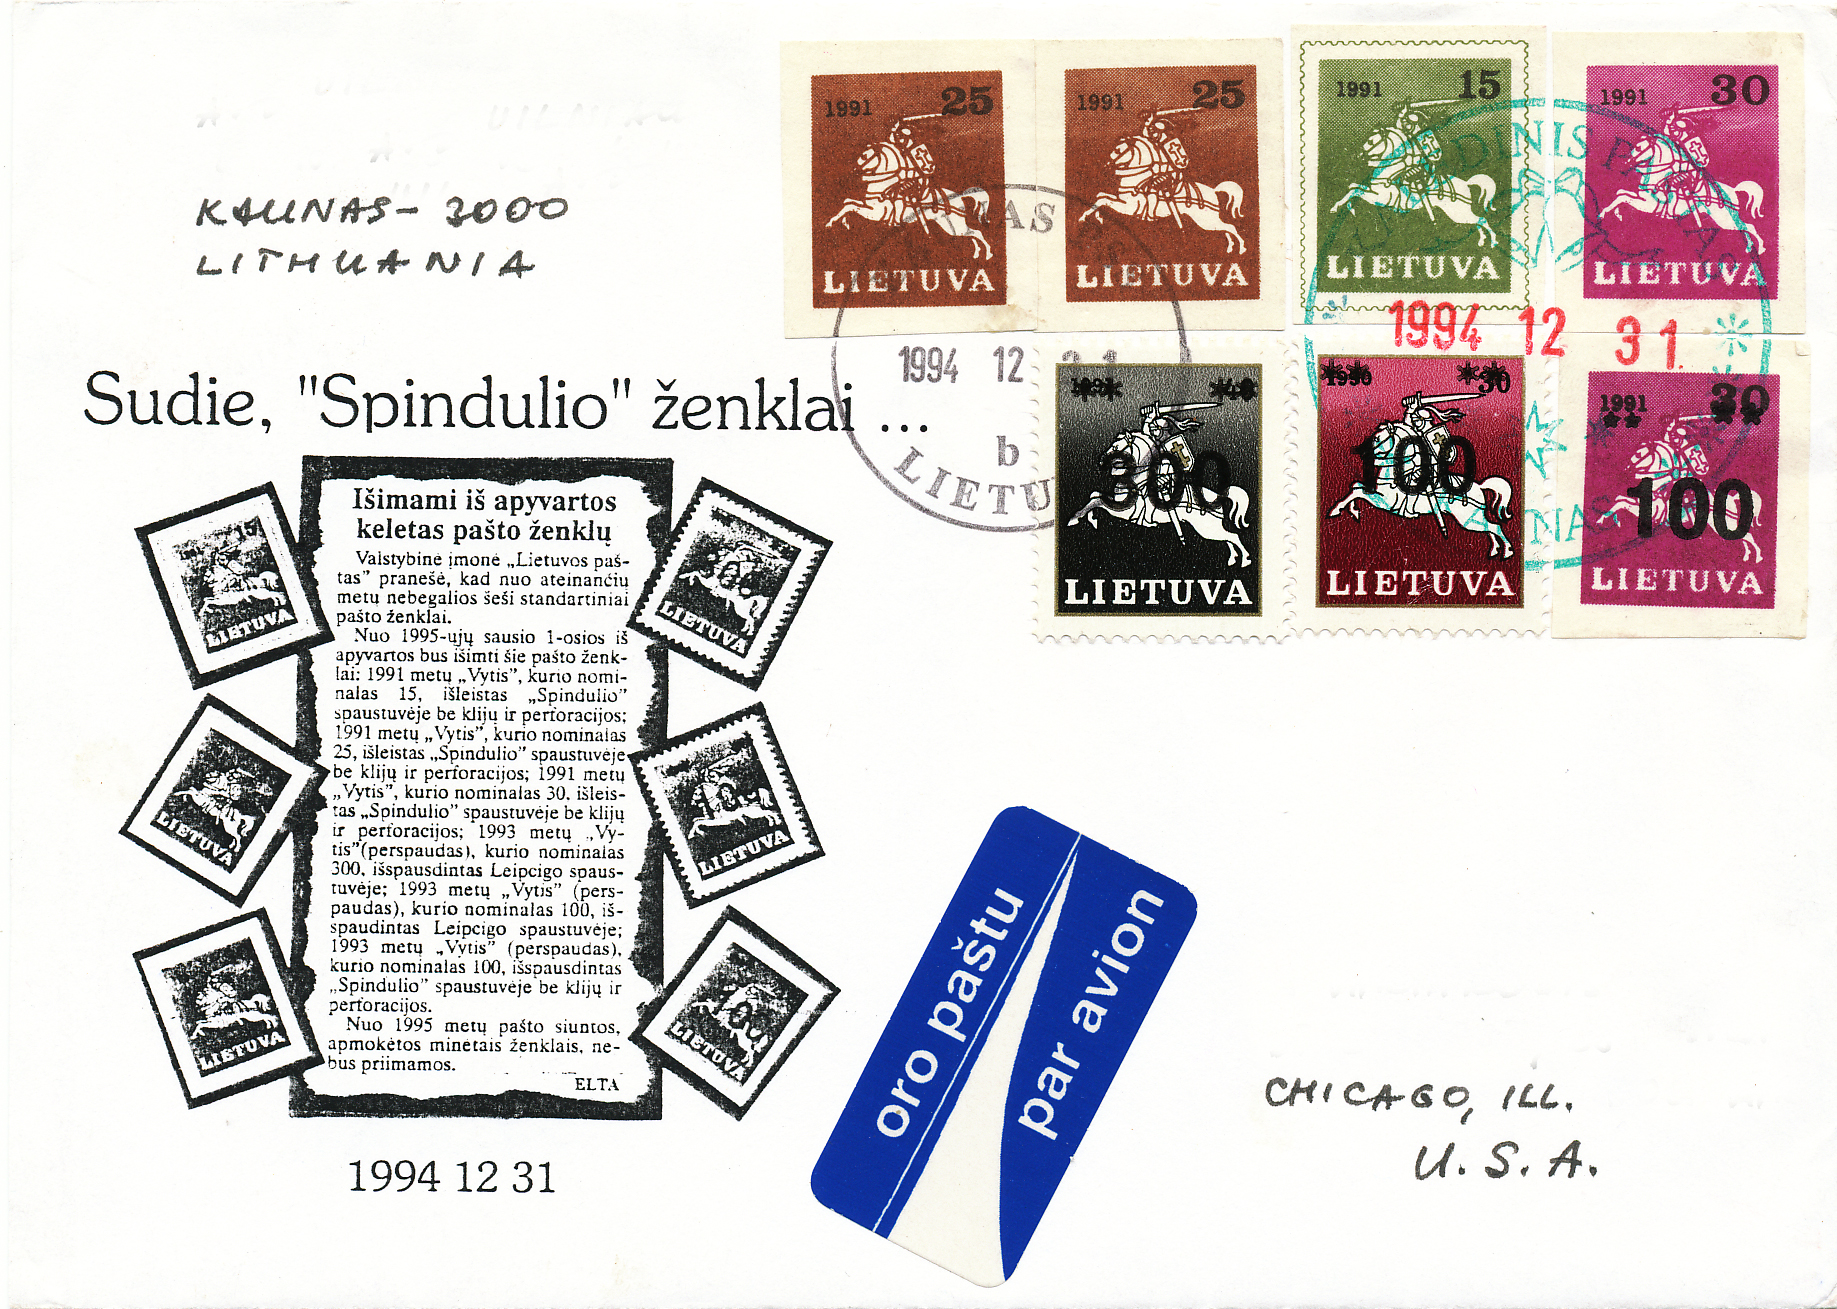 Last day cover with all SPINDULYS provisional Vytis issues